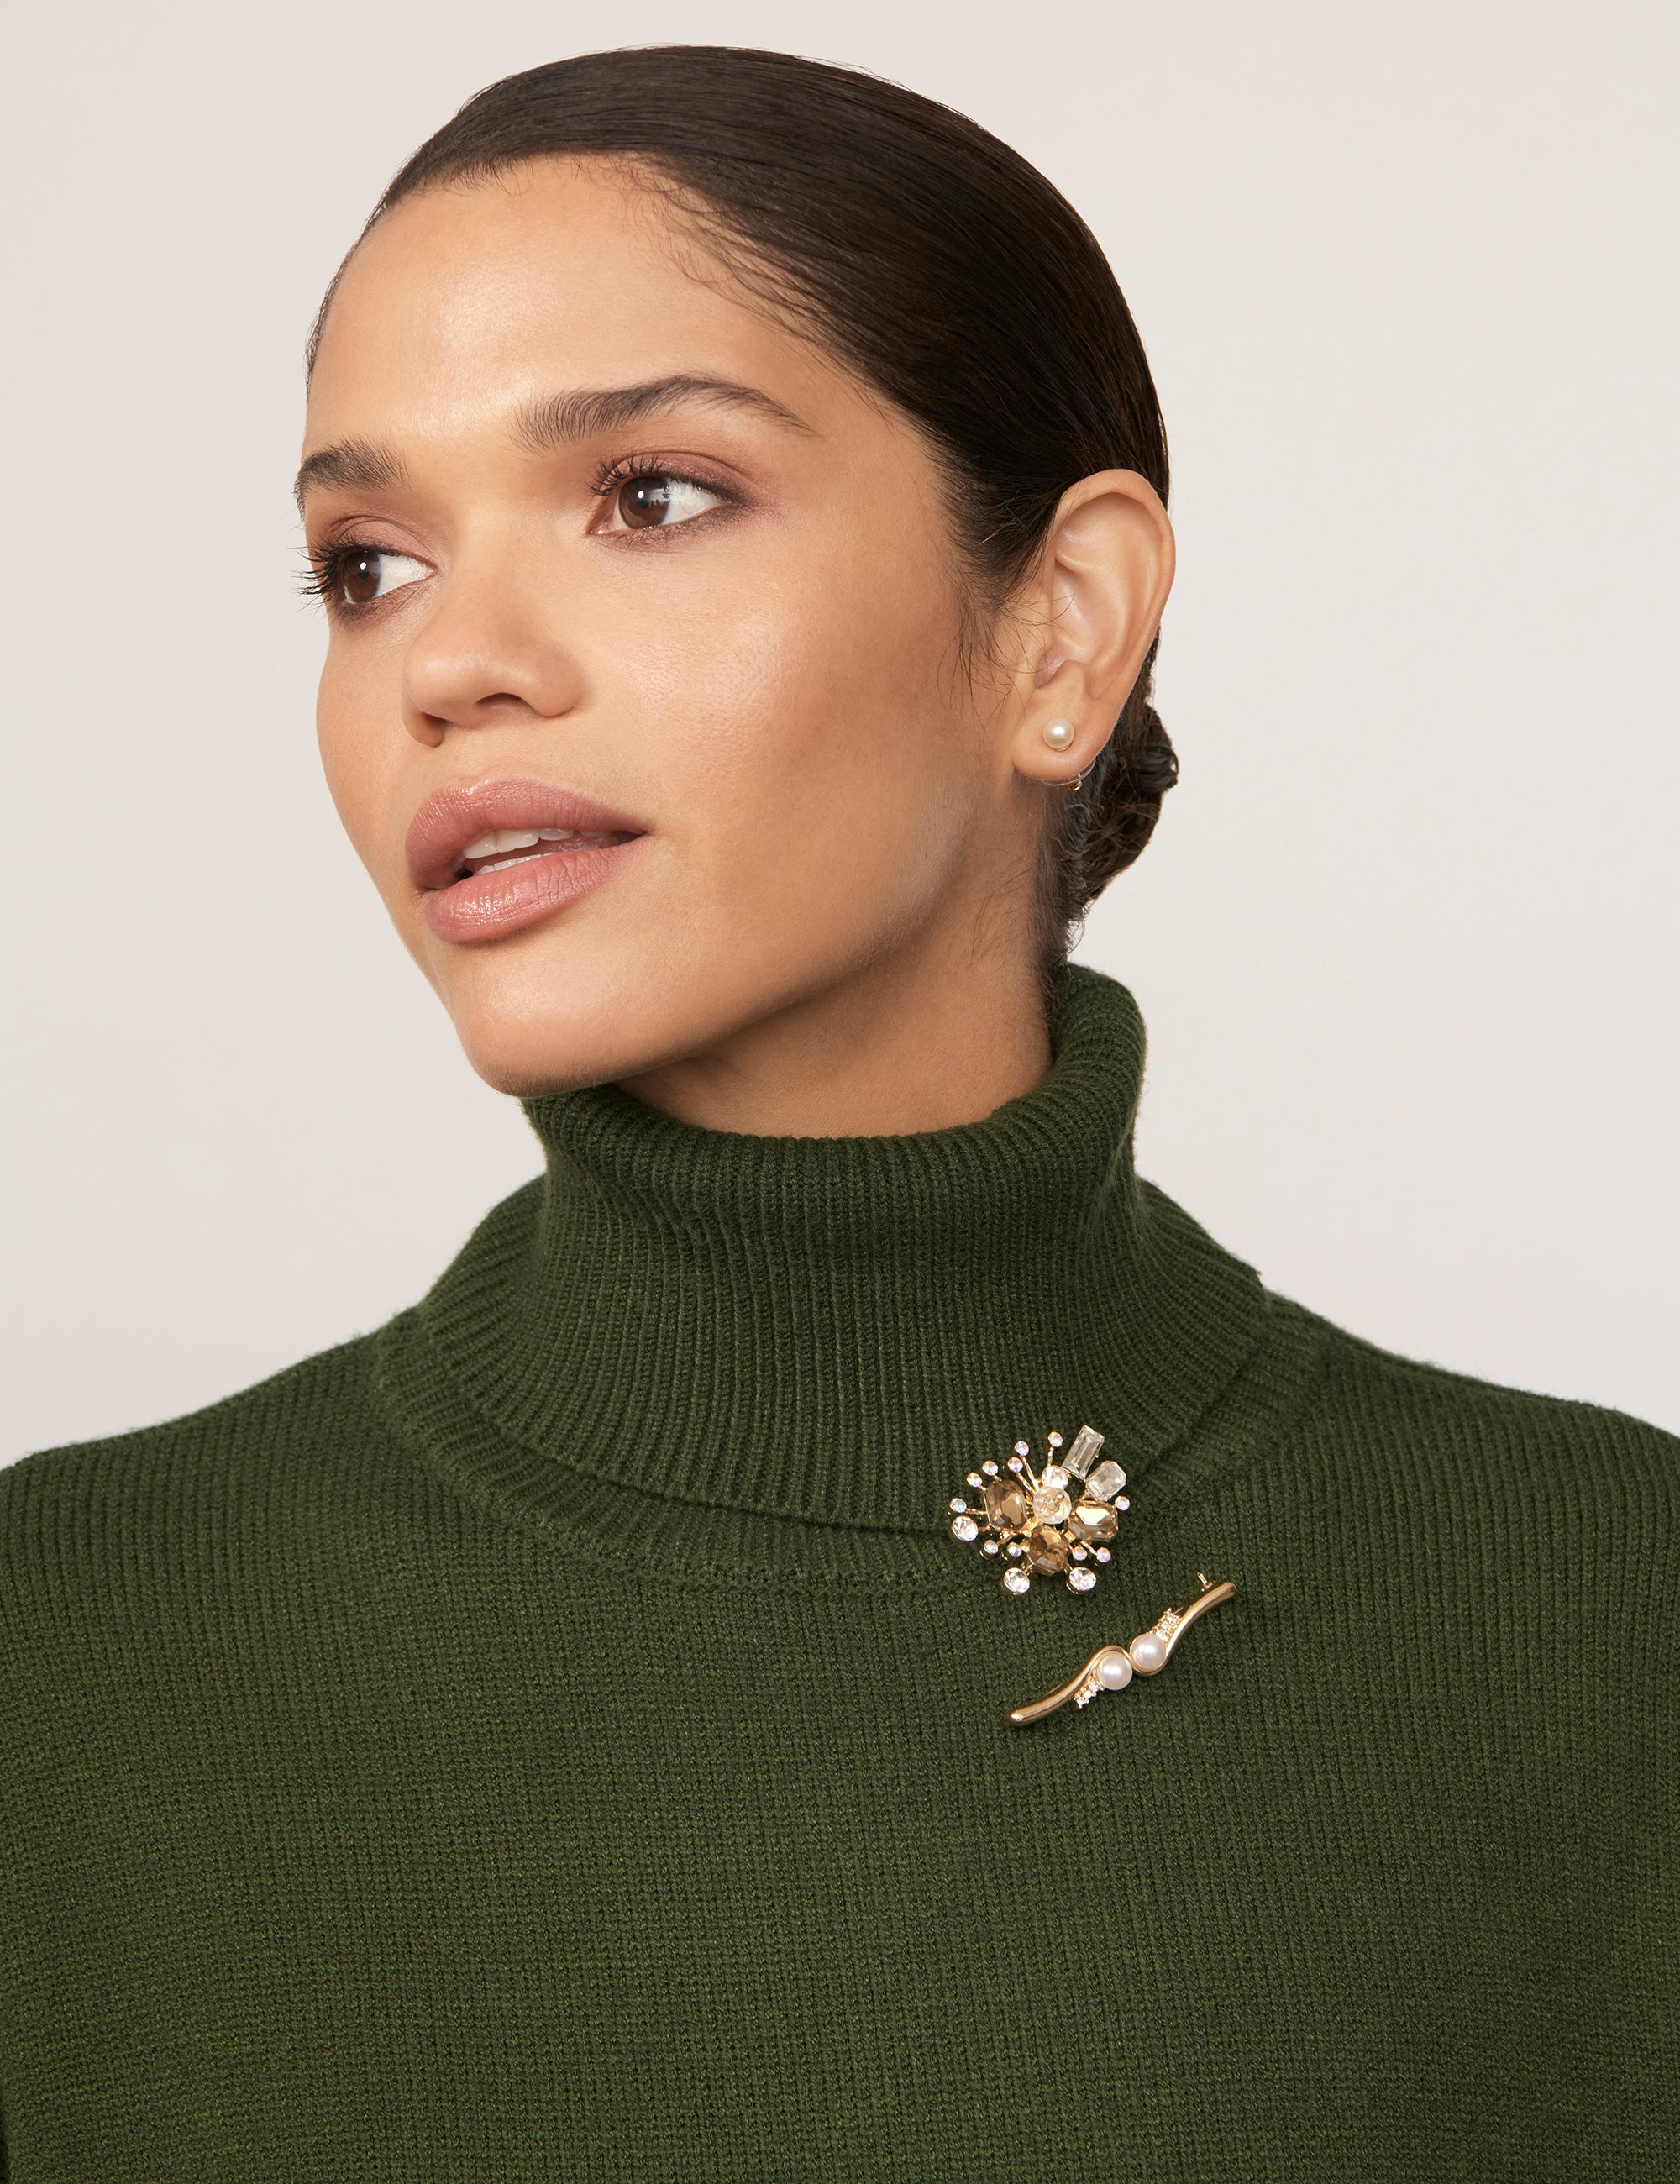 A woman with tan skin and dark hair wears a green turtleneck sweater. She is wearing a pair of sparkling brooches with gold-coloured plating.